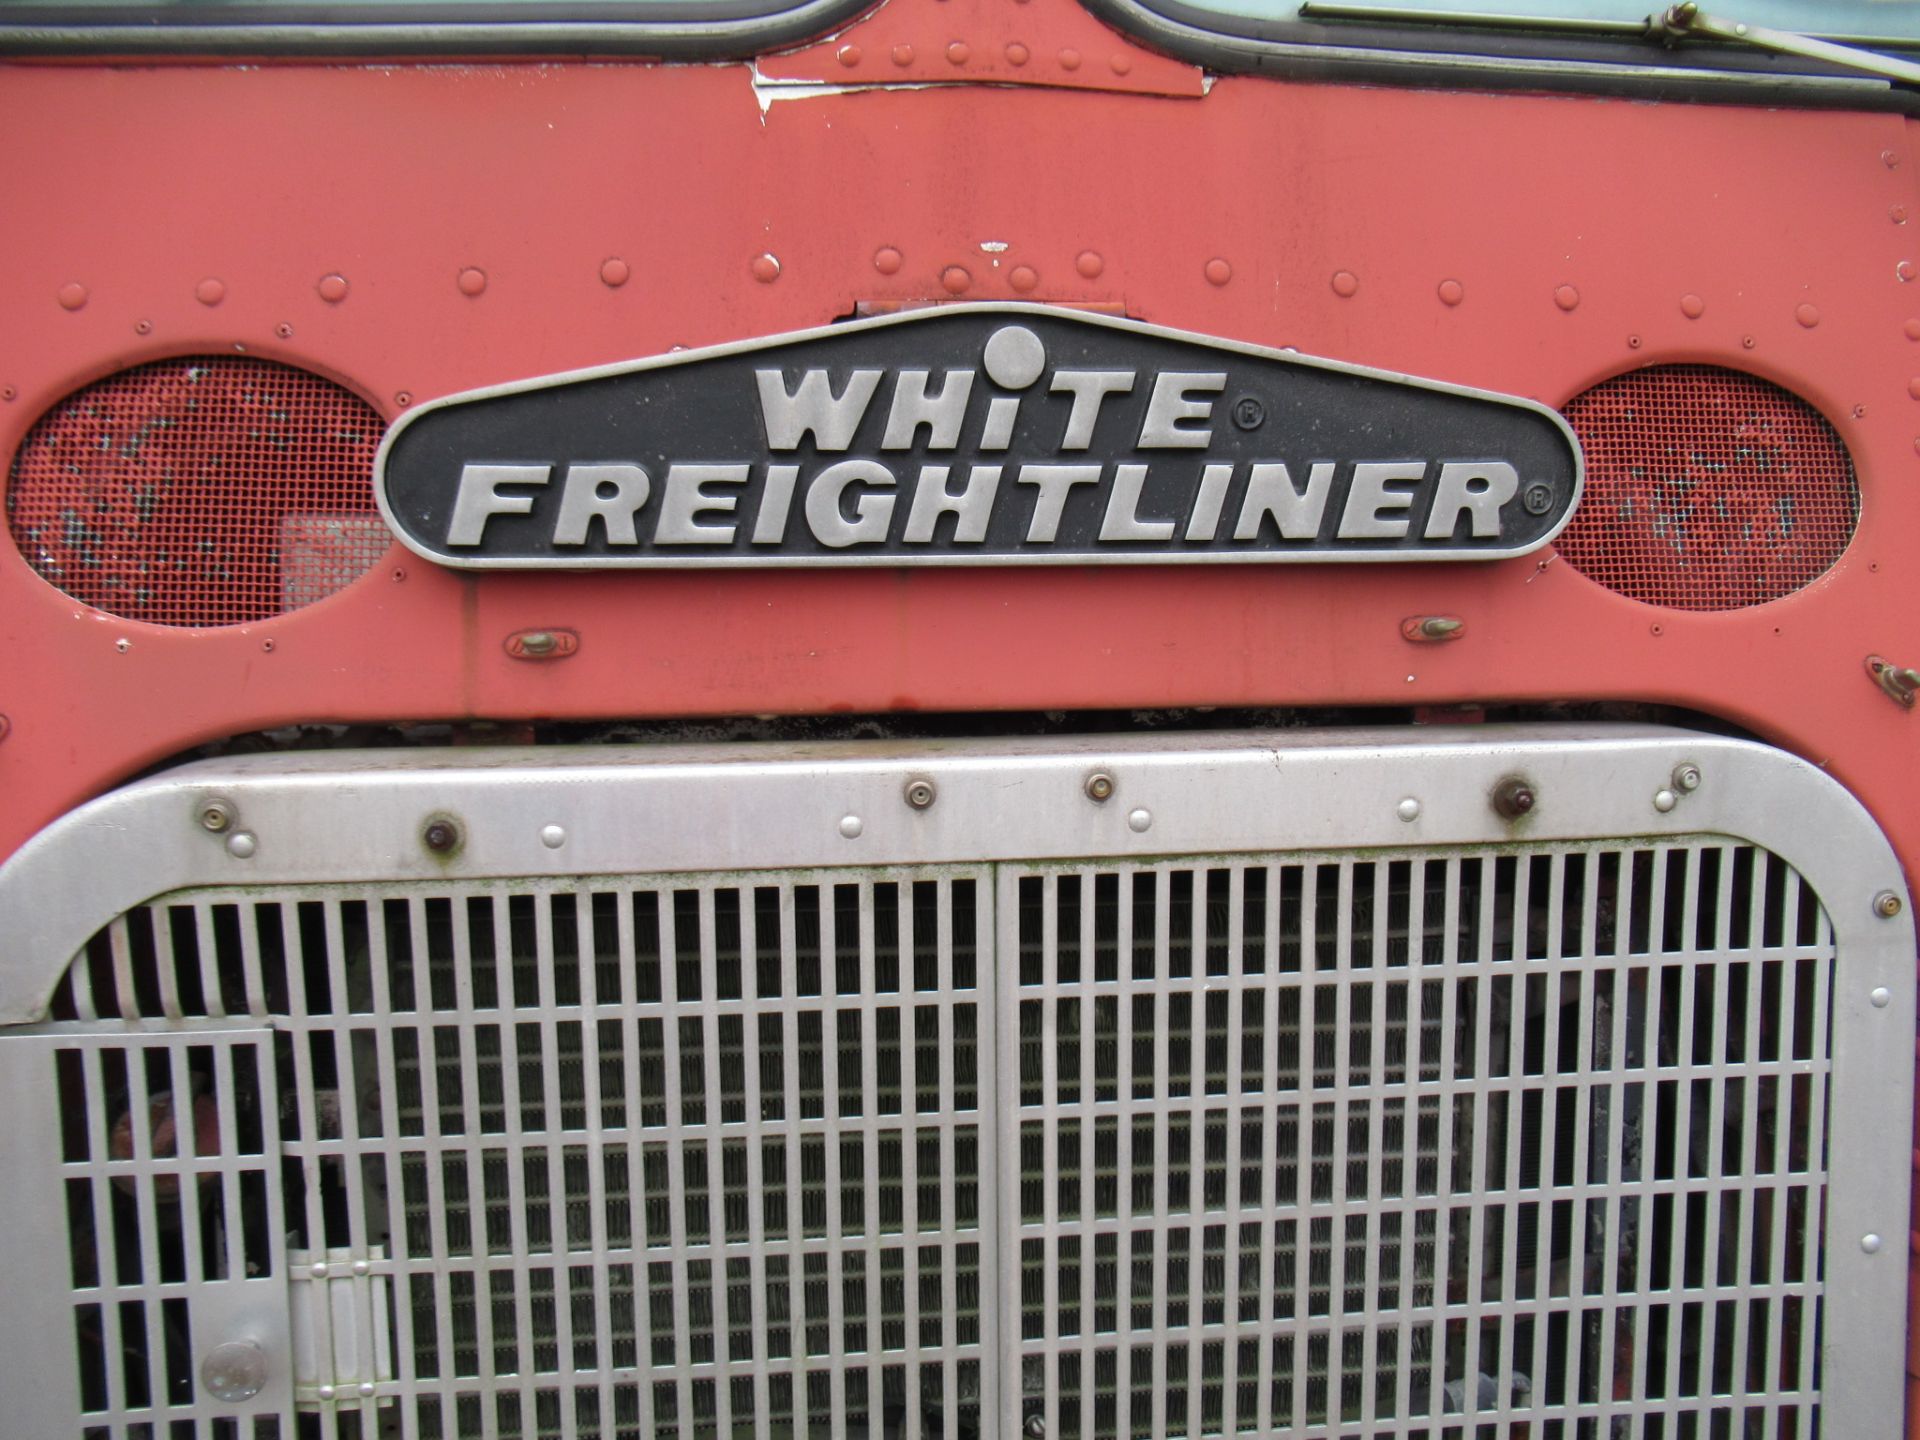 1968 White/Freightliner, 350 Cummins, with Wrecker Body 13-Speed, AC, ( Running ), 617,453 miles - Image 7 of 38